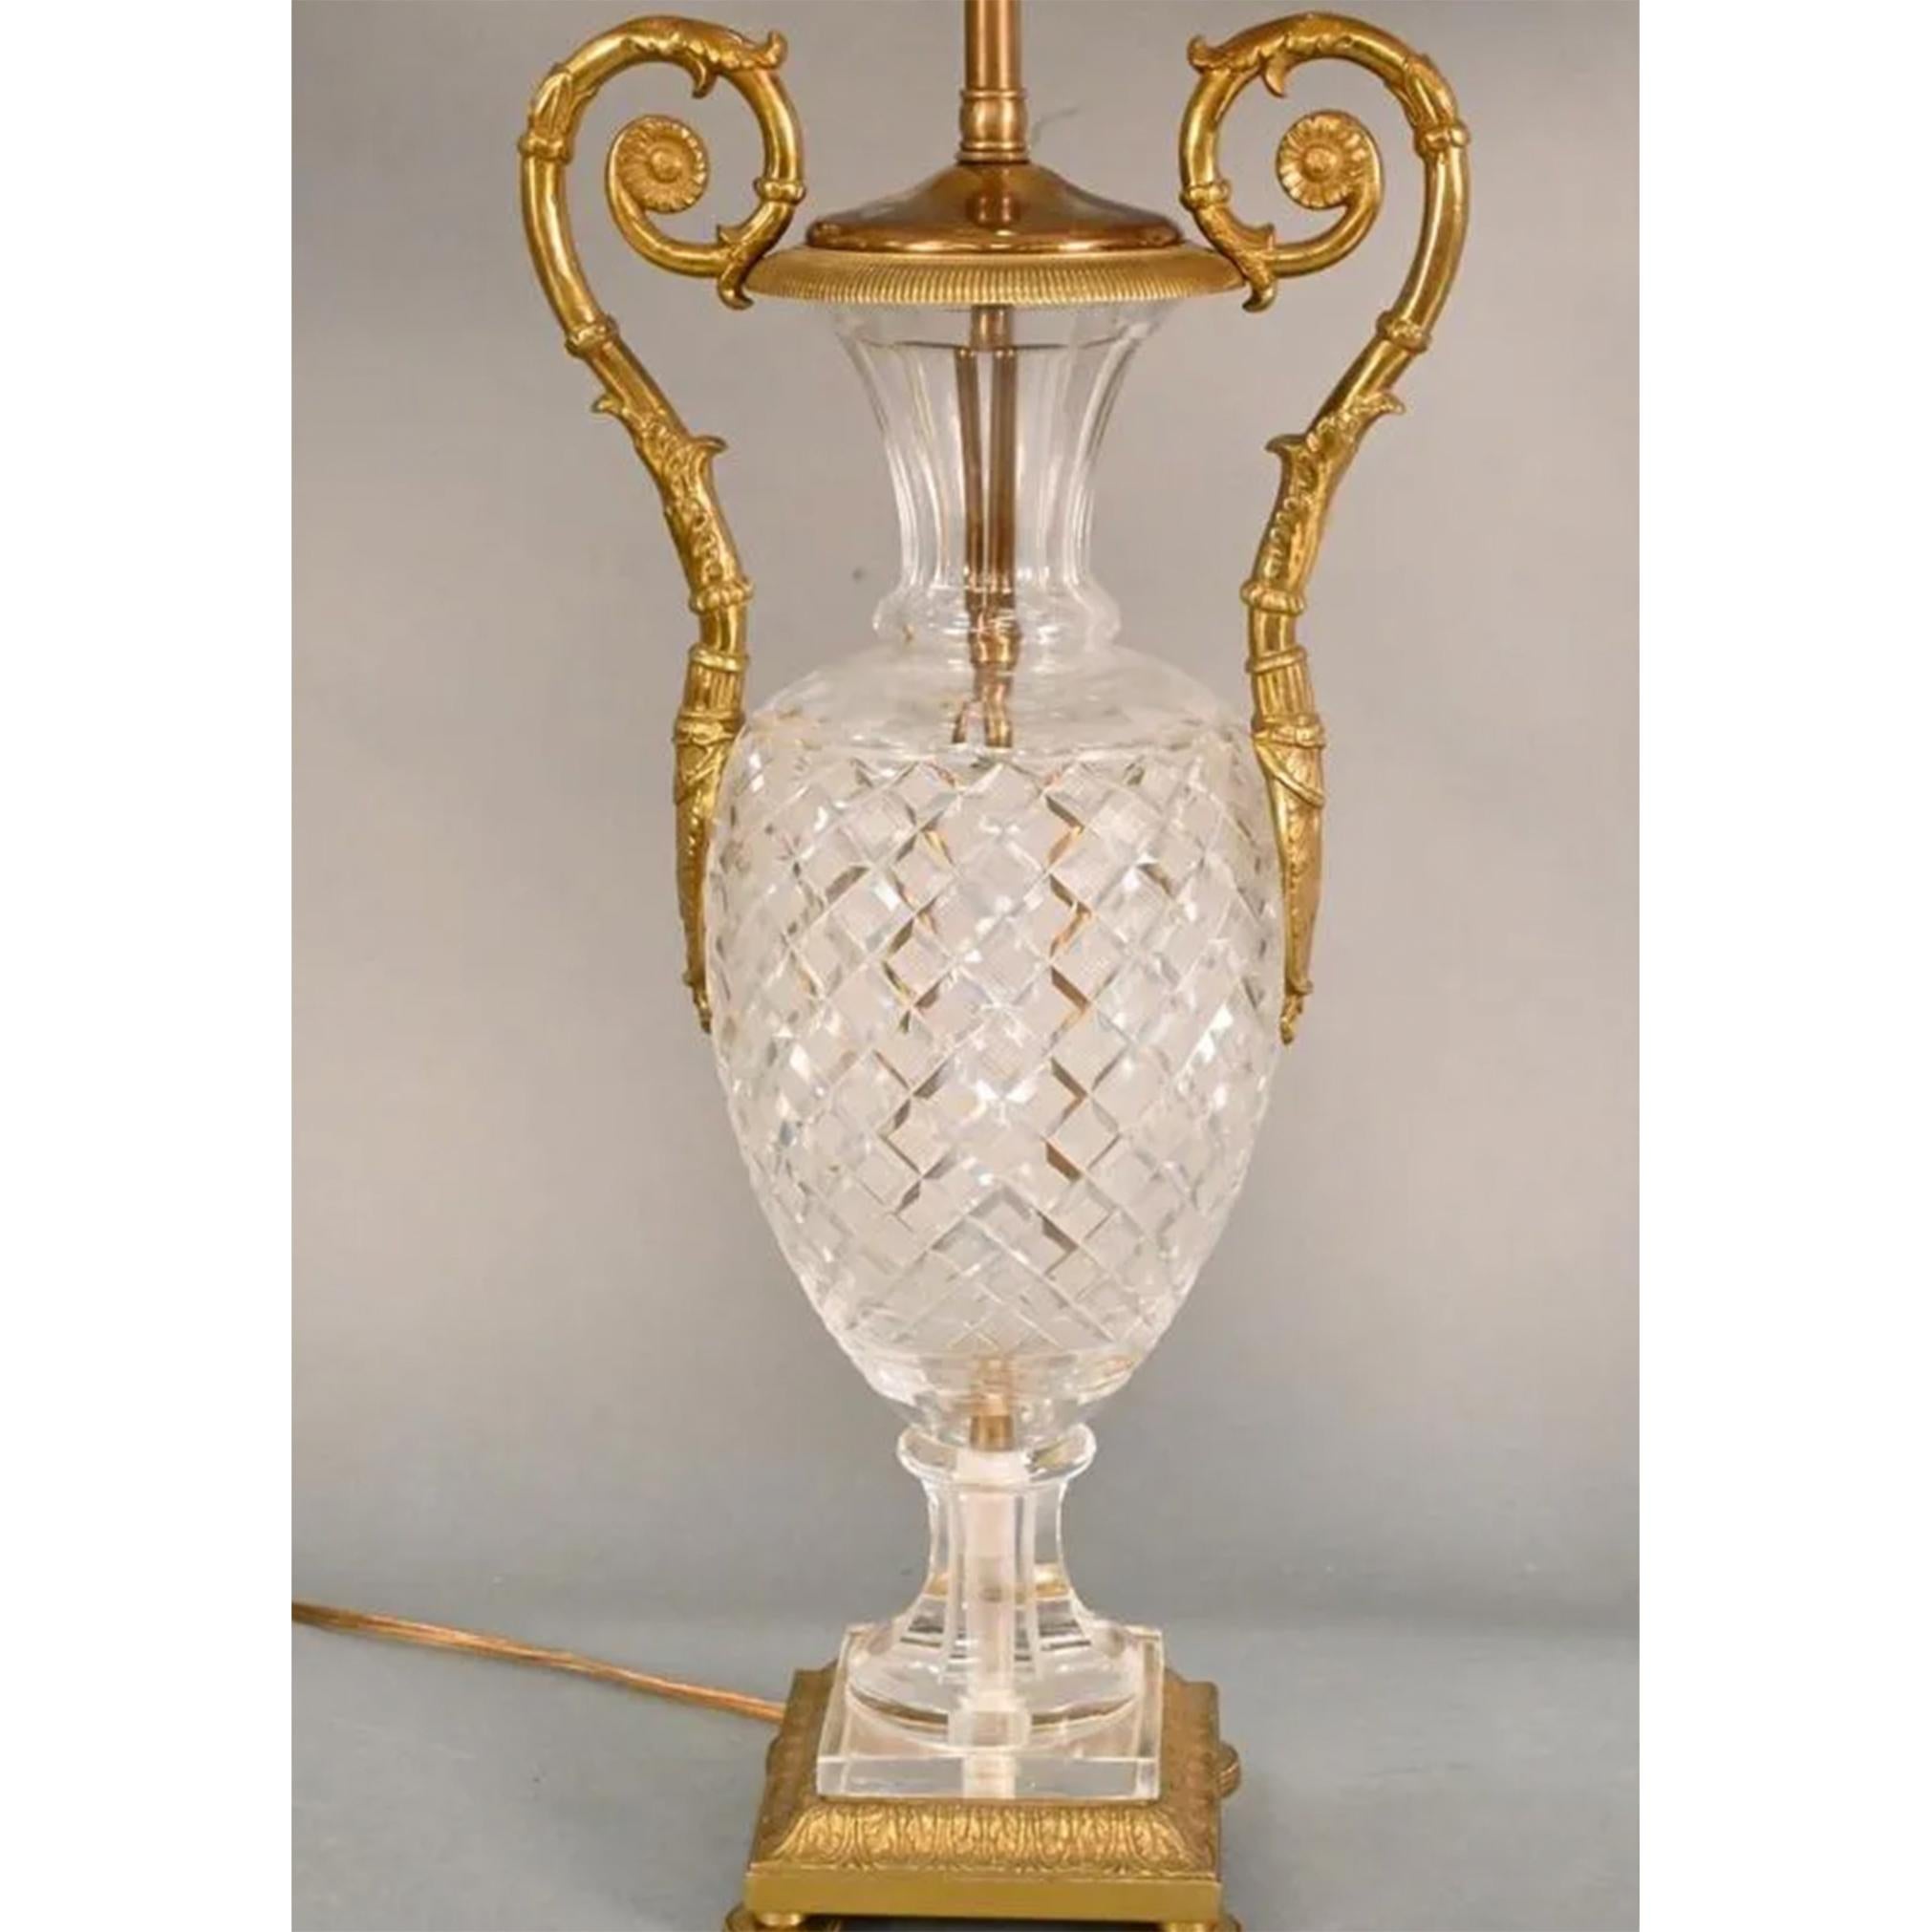 A pair of Baccarat cut crystal lamps

Empire style vases with lattice pattern and bronze scroll formed handles, resting on on bronze square base. 

Height: 29 in.